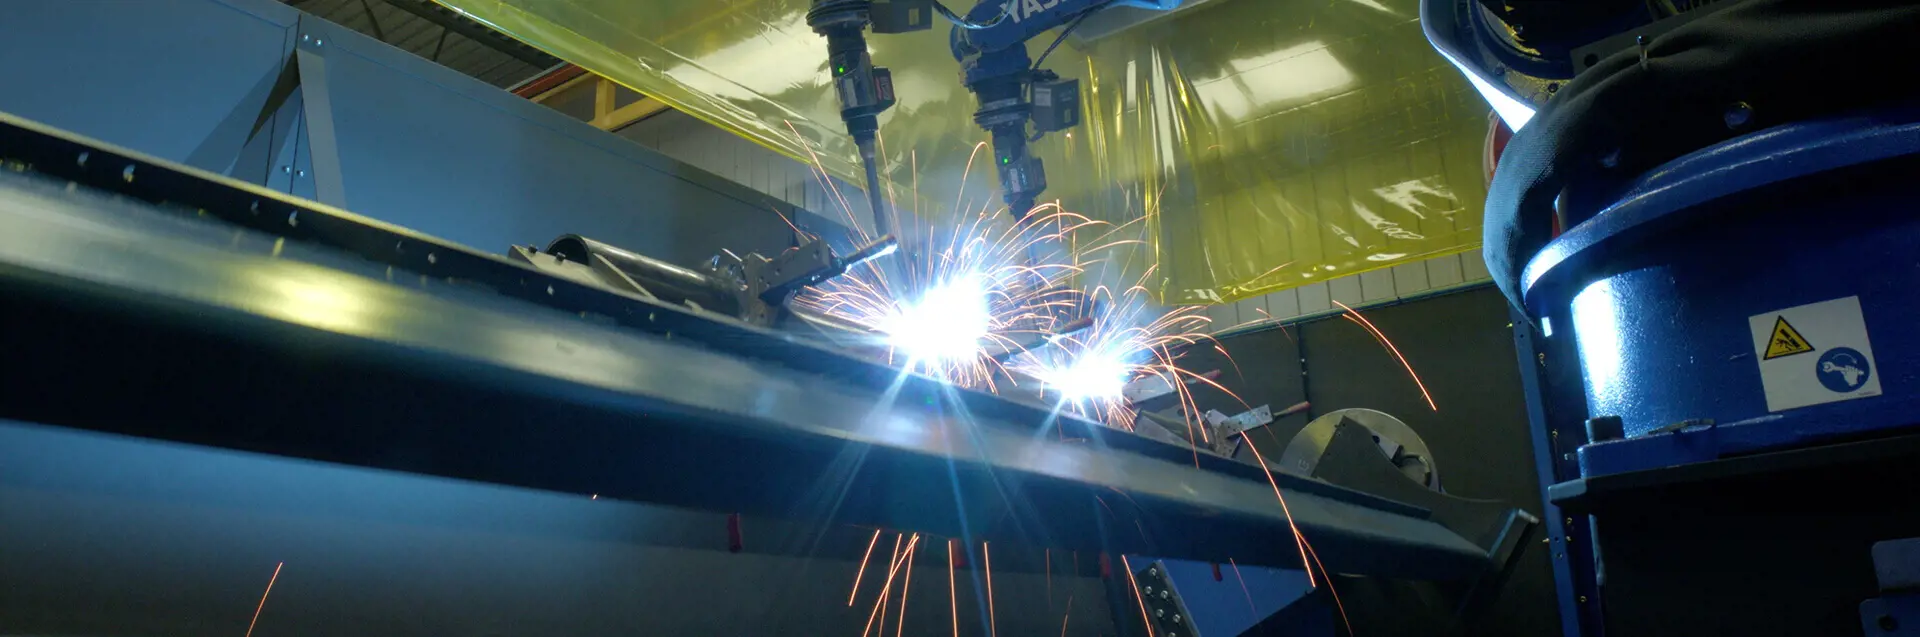 Robotic and manual welding